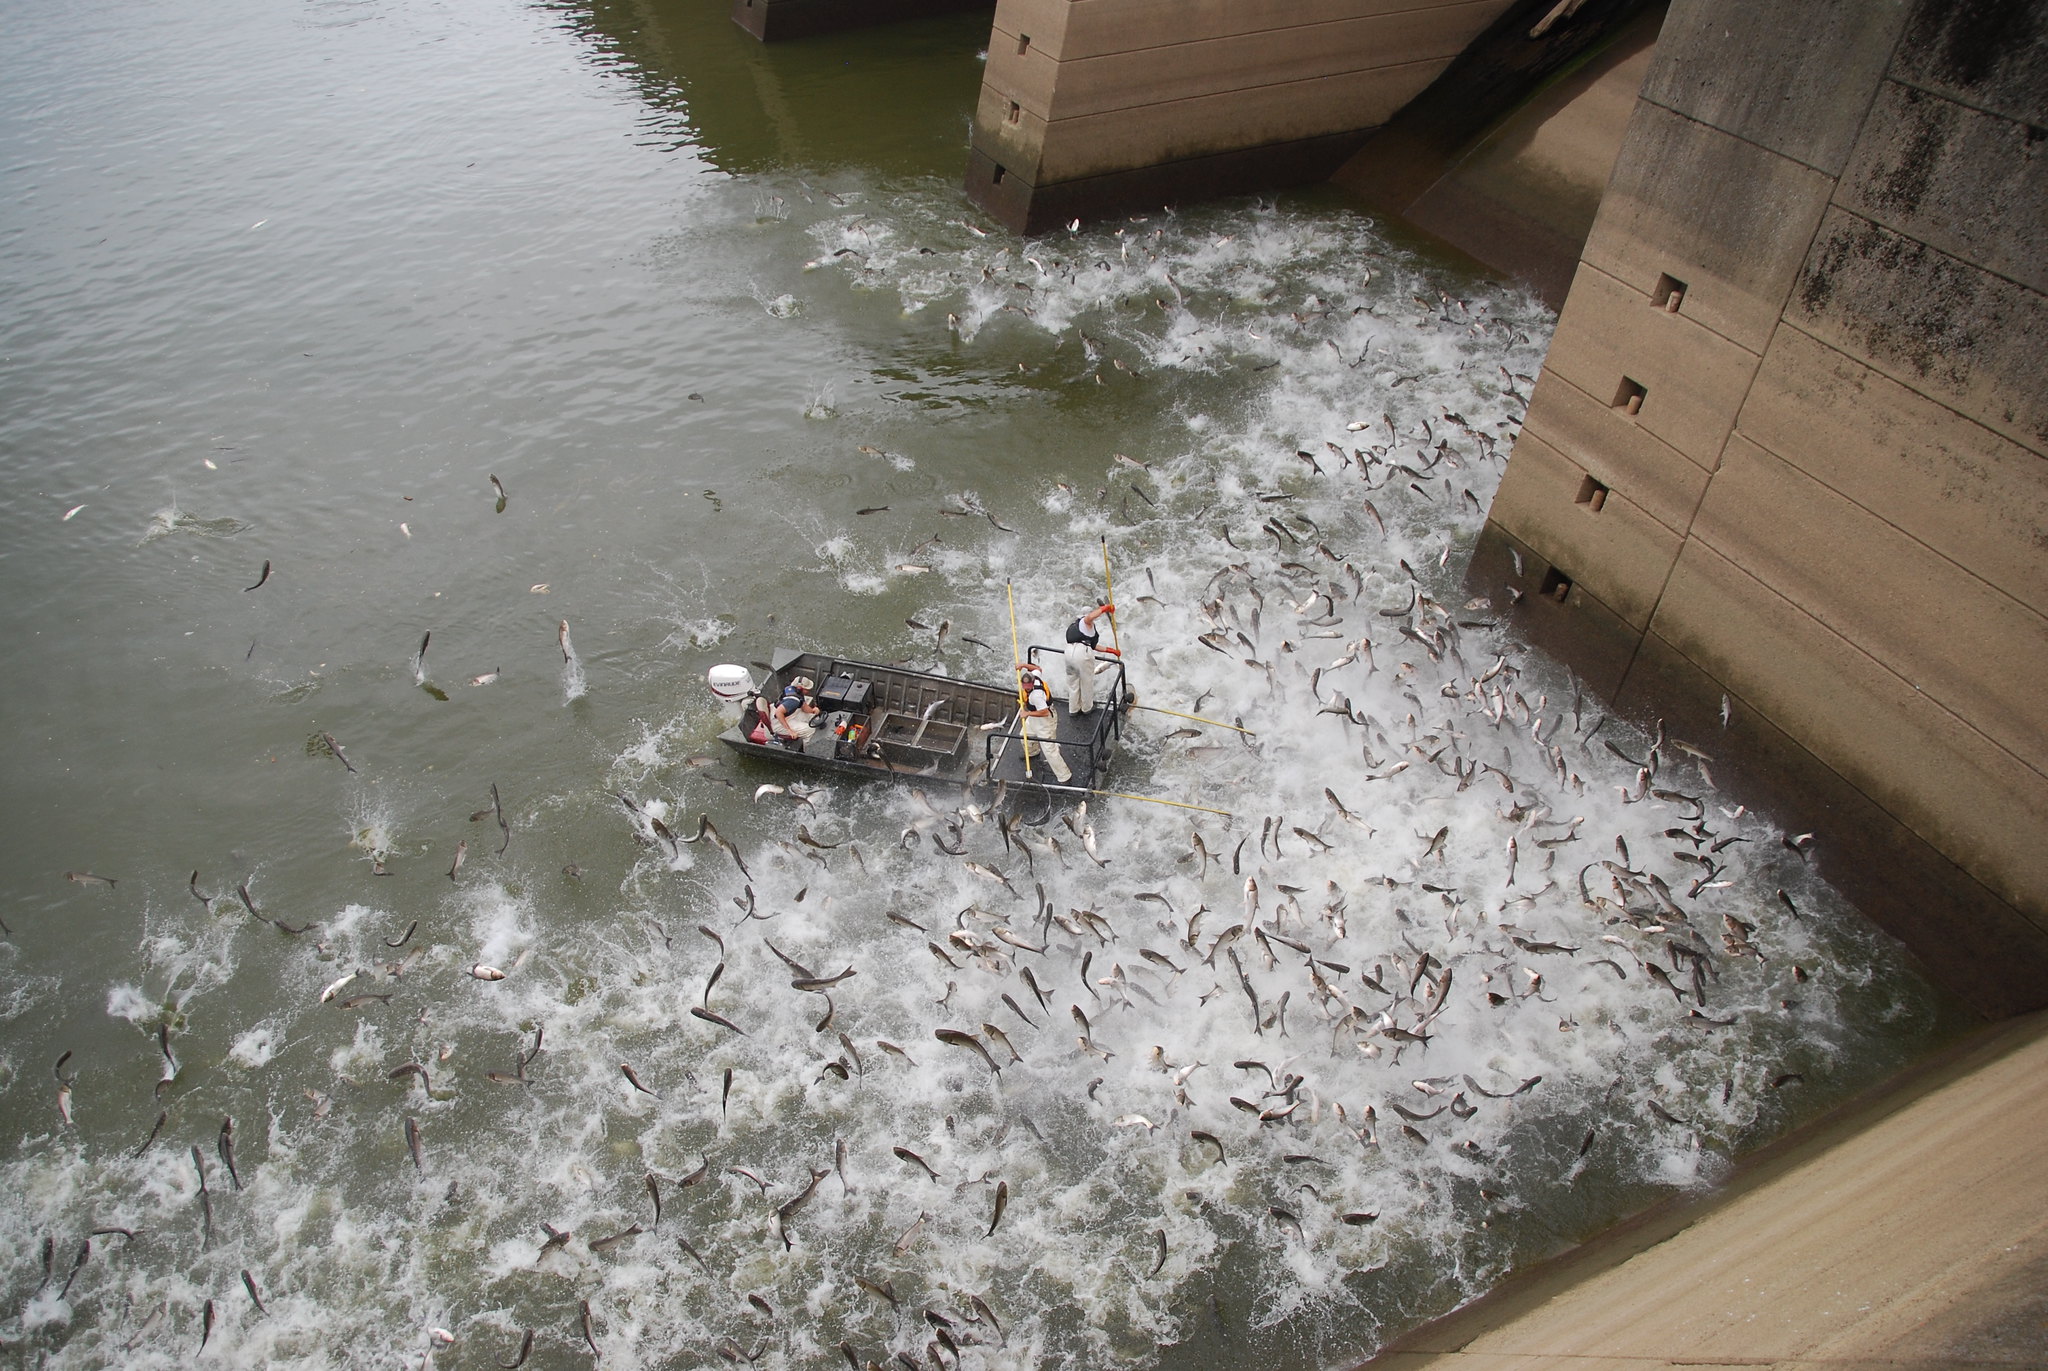 Numerous silver carp jumping out of the water.